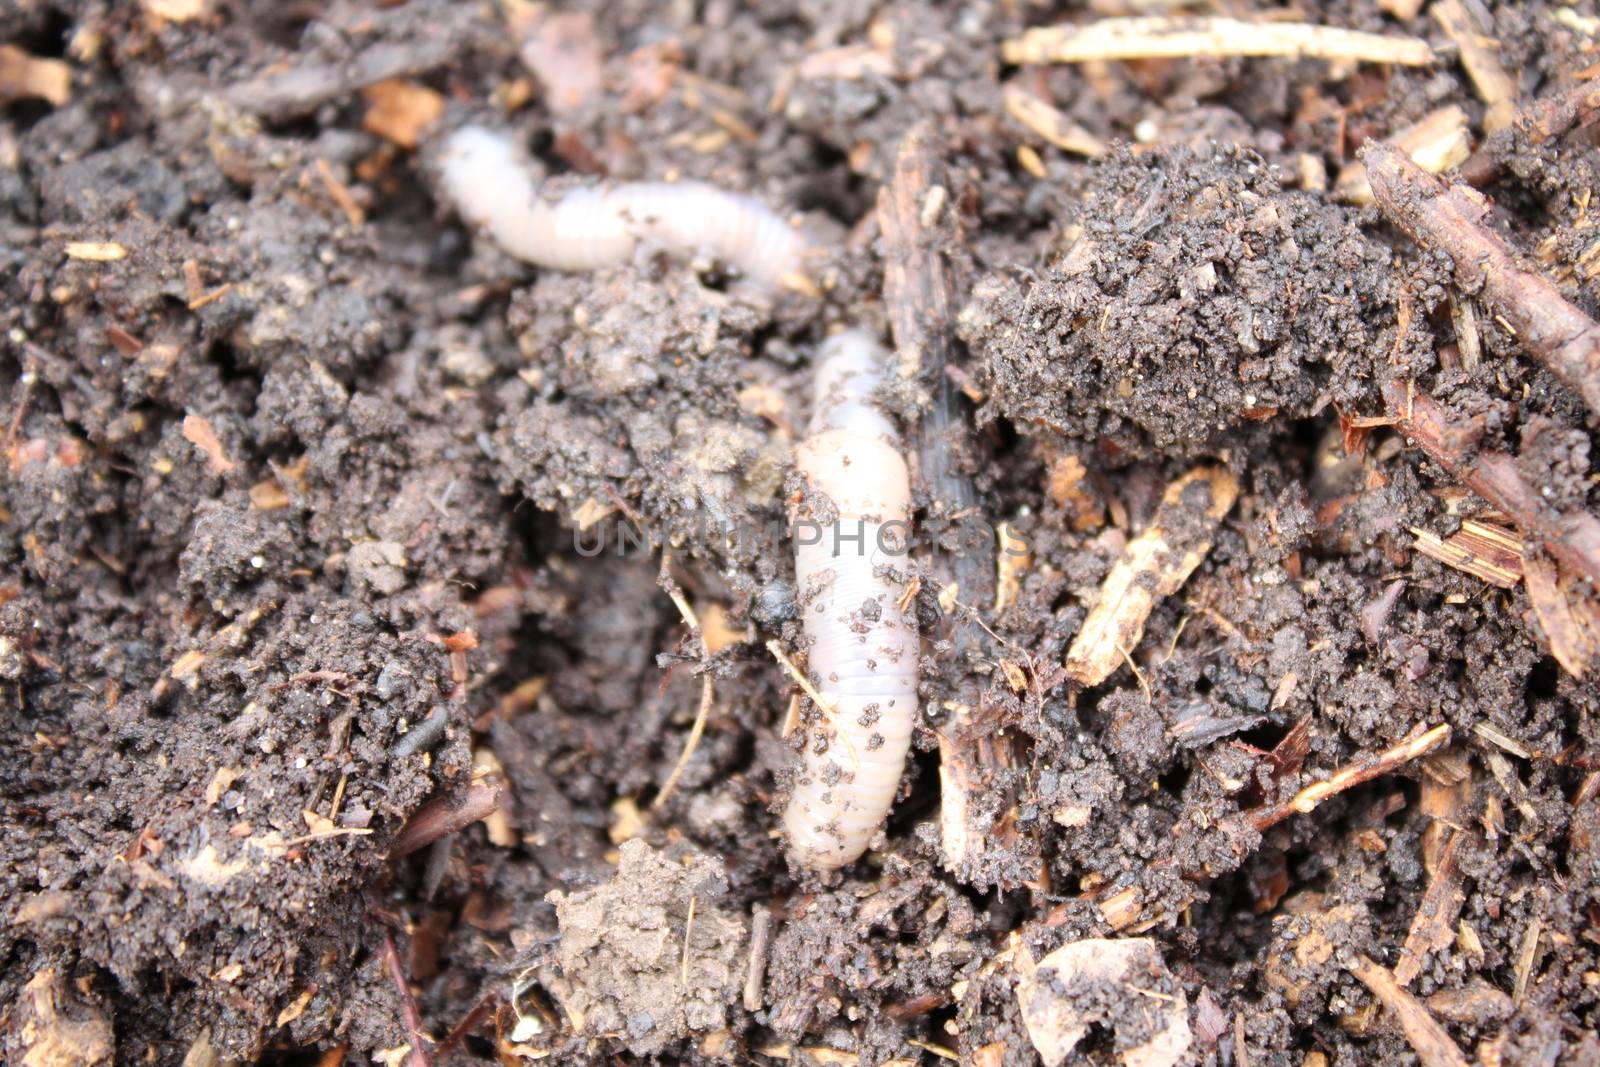 The picture shows a worm in the compost.